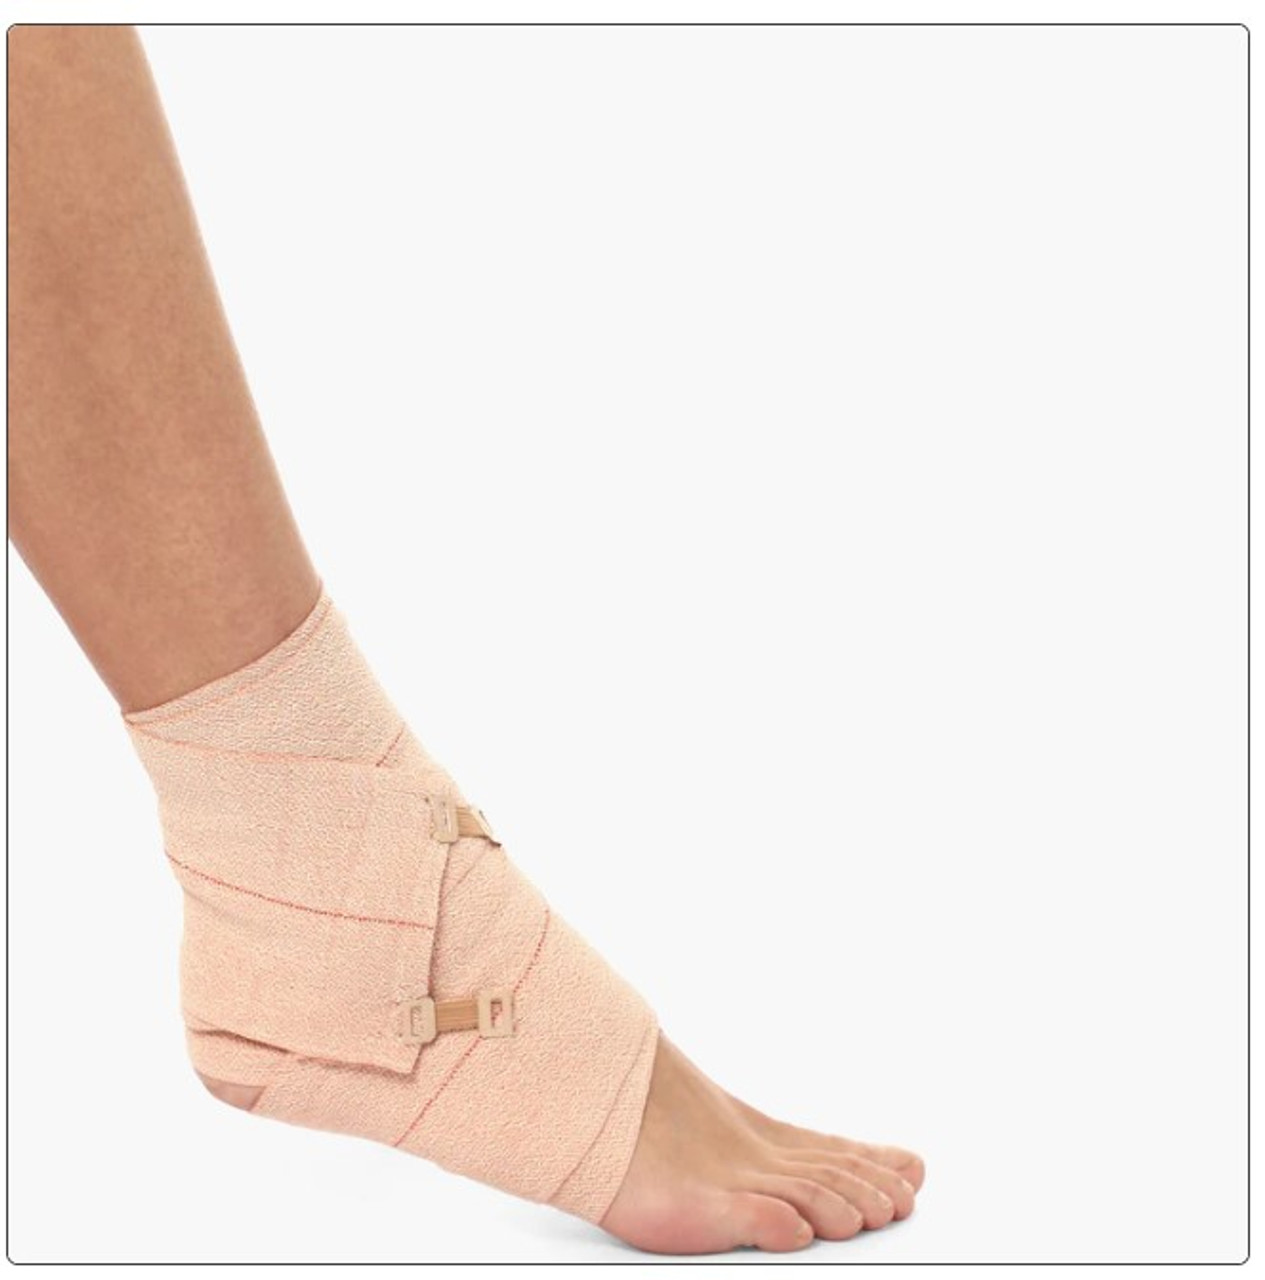 Applying a compression wrap for a sprained ankle